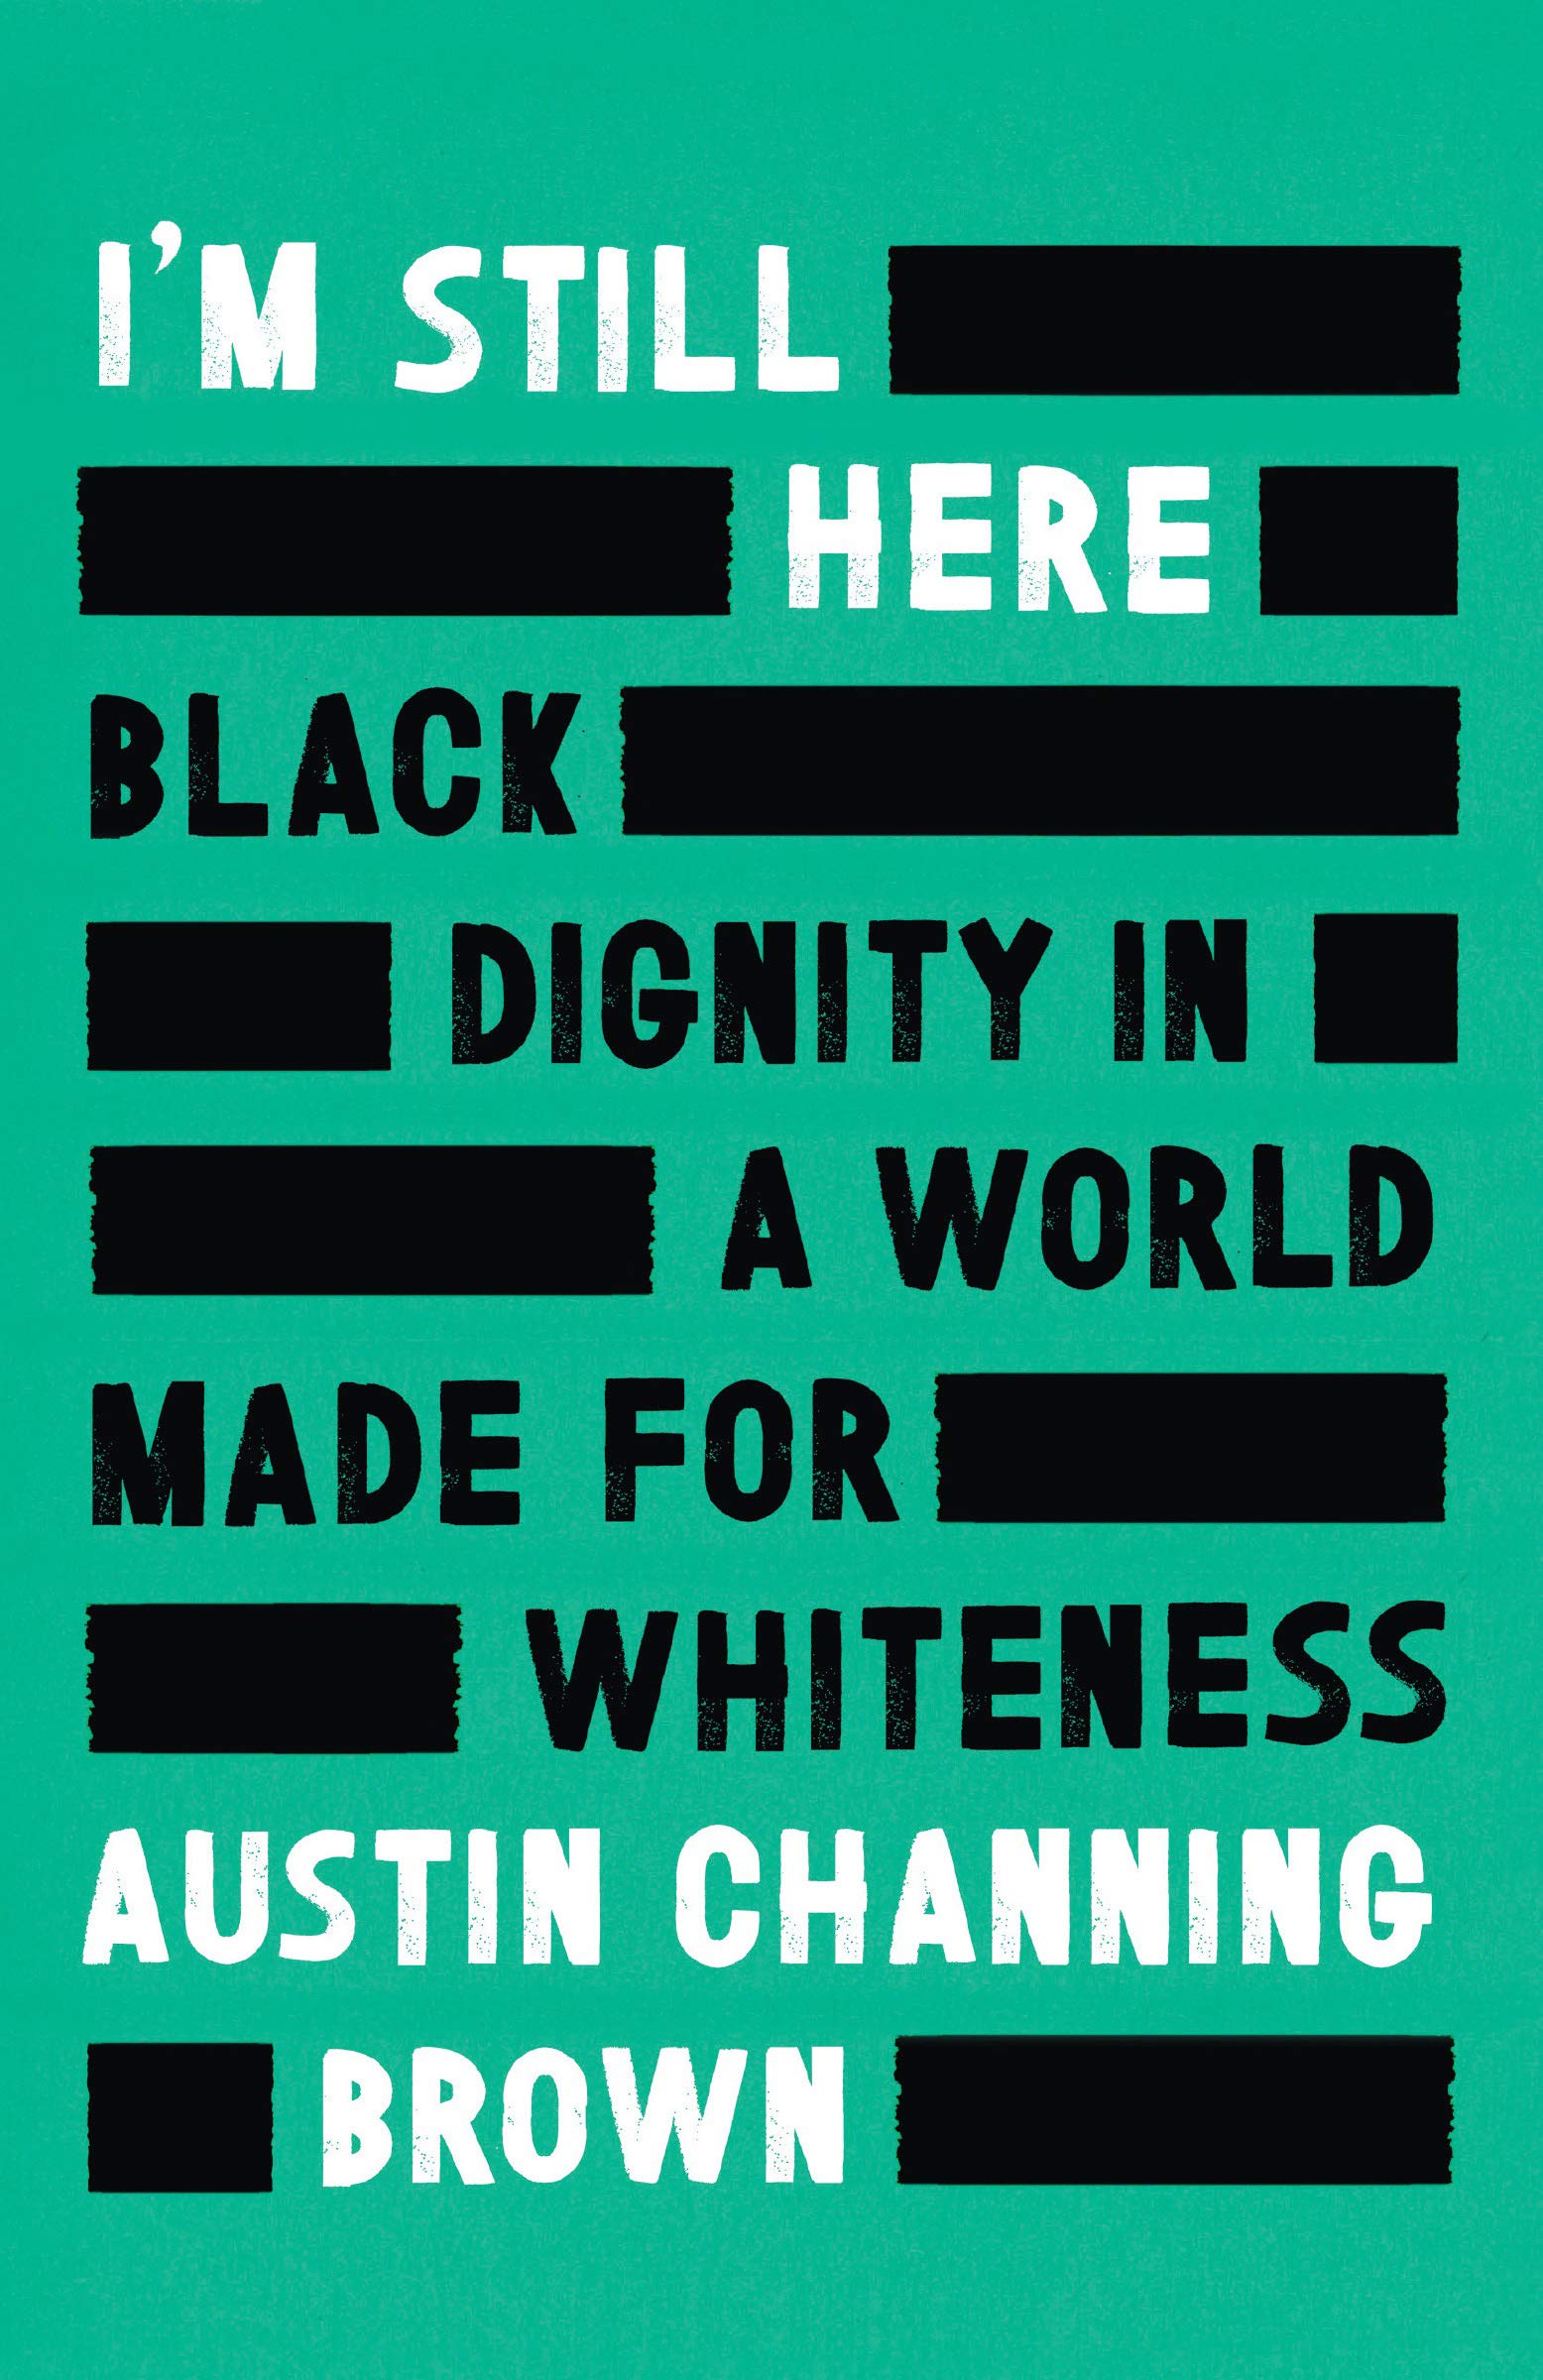 I'm Still Here: Black Dignity in a World made for Whiteness by Austin Channing Brown